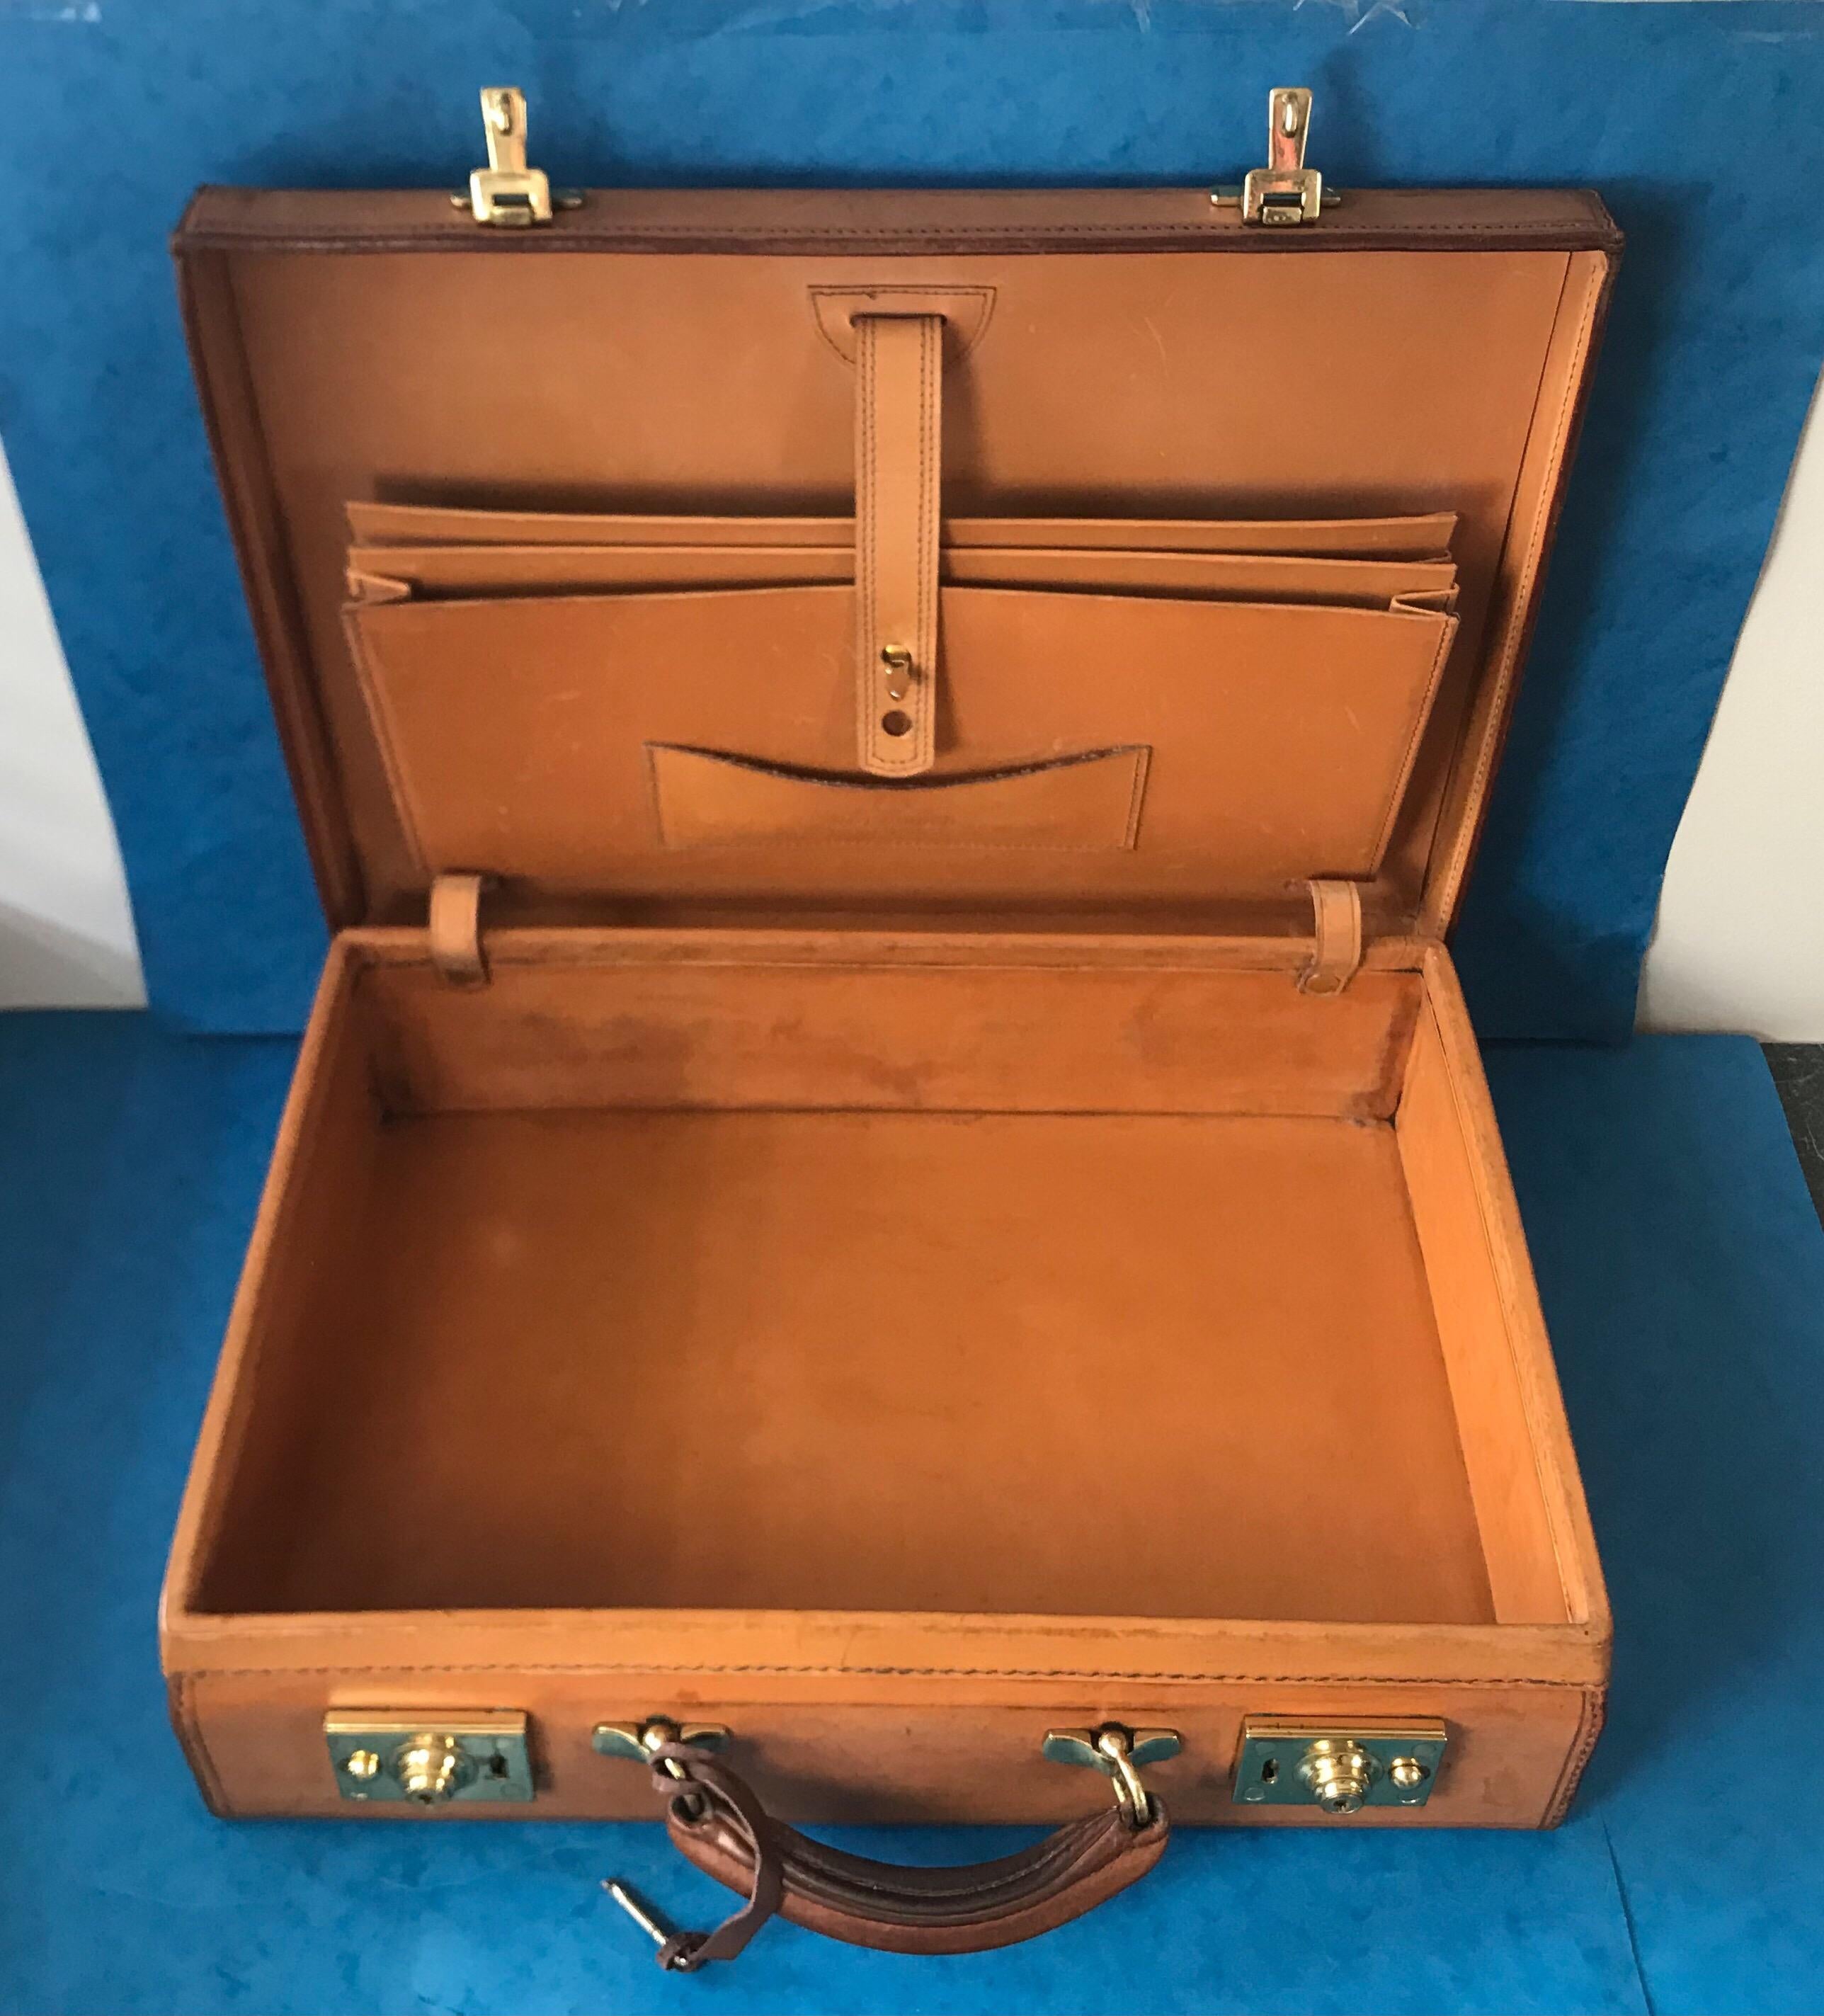 1960-1970 Hide Leather Attaché Case by “W & H Gidden” 9